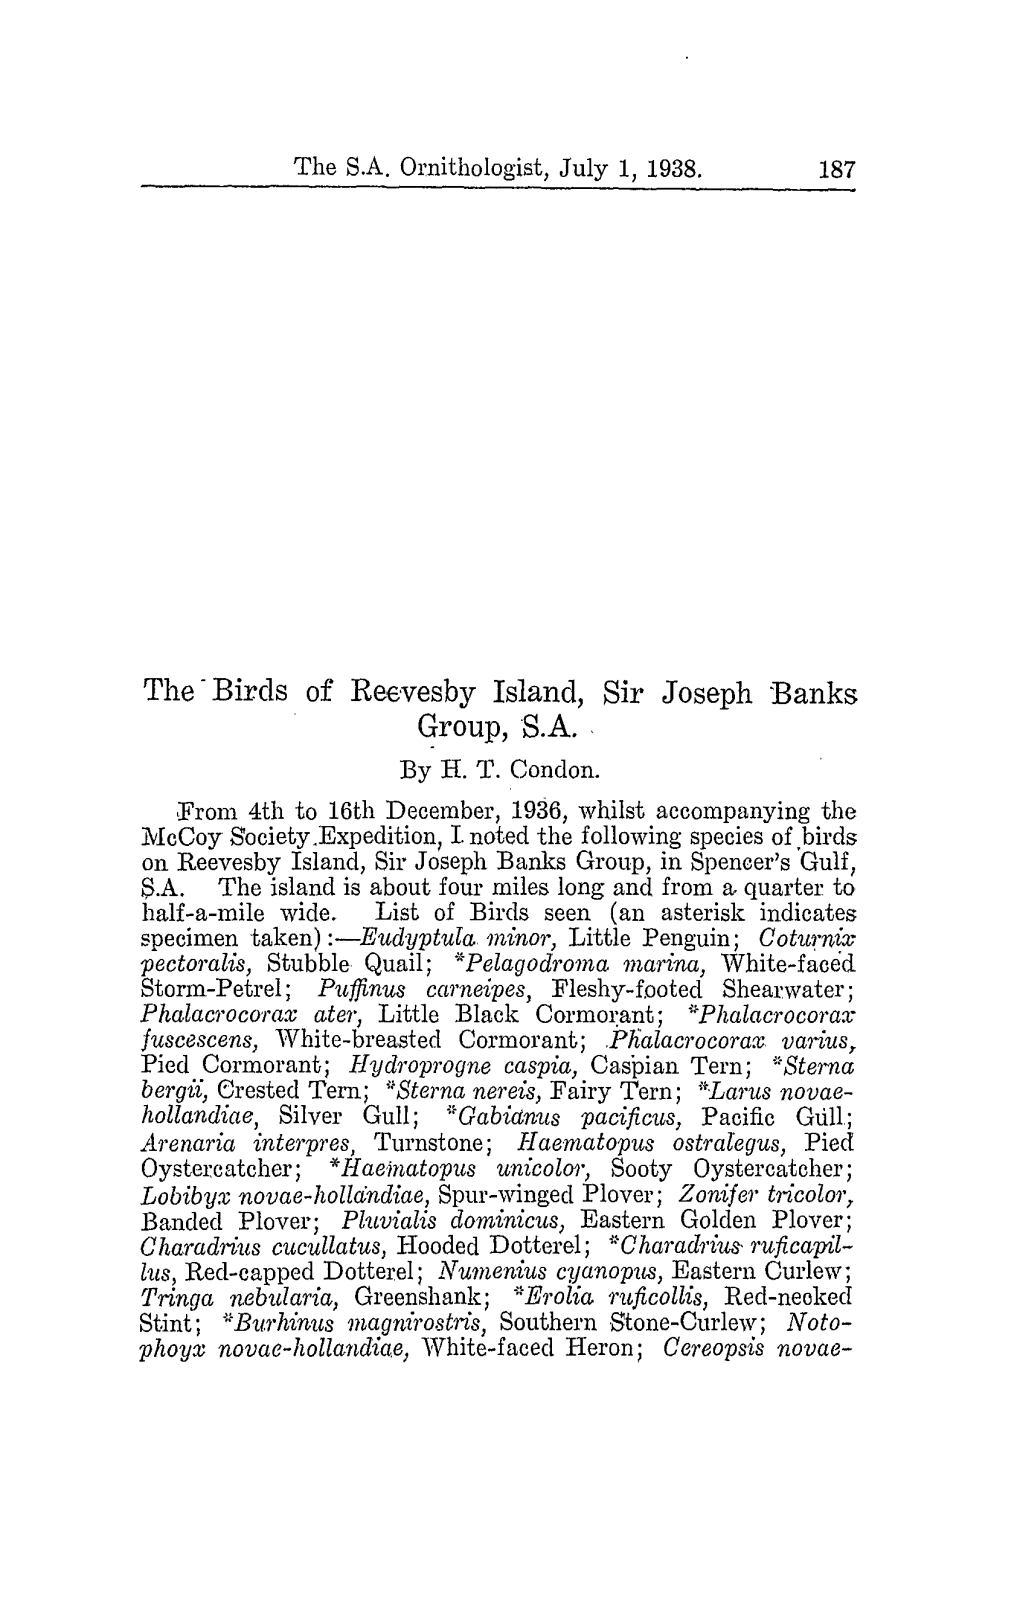 The-Birds of Reevesby Island, Sir Joseph Banks Group,8.A